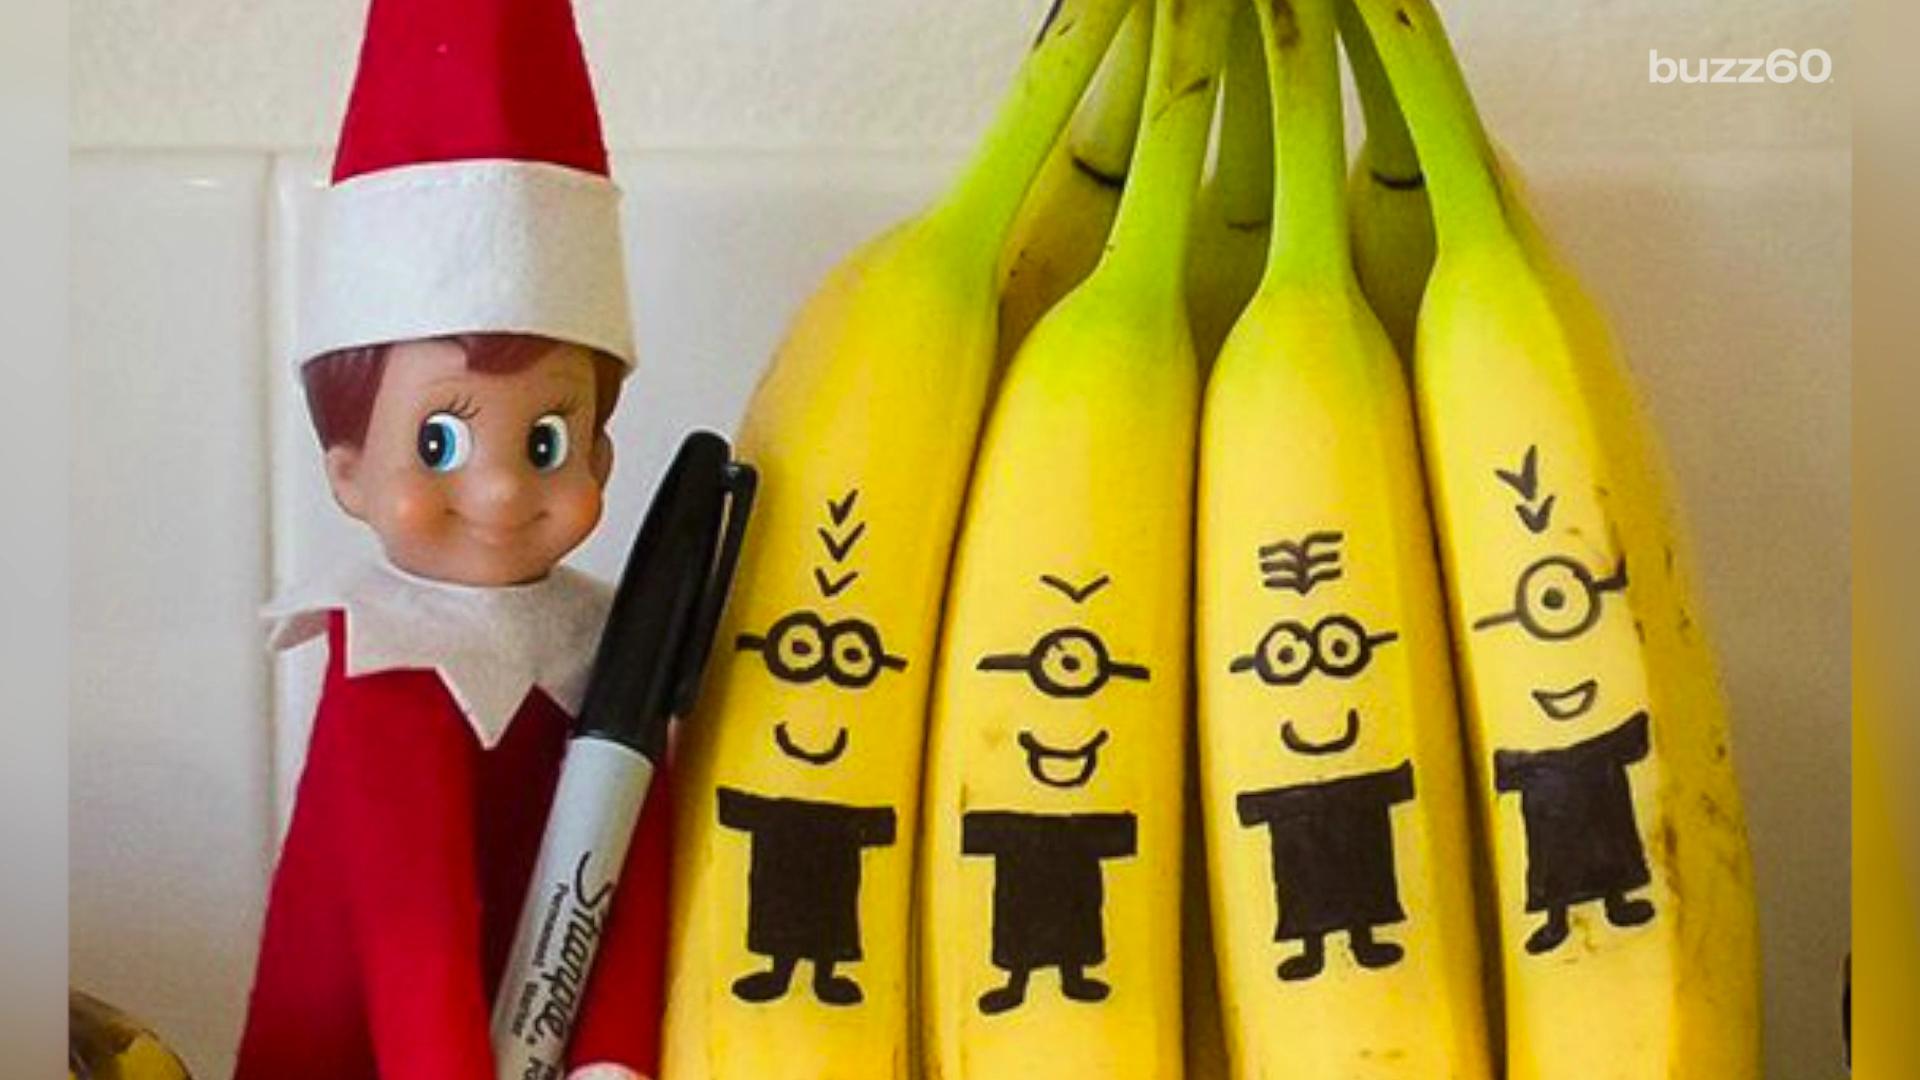 Naughty Elf On The Shelf Poop Cover Photo